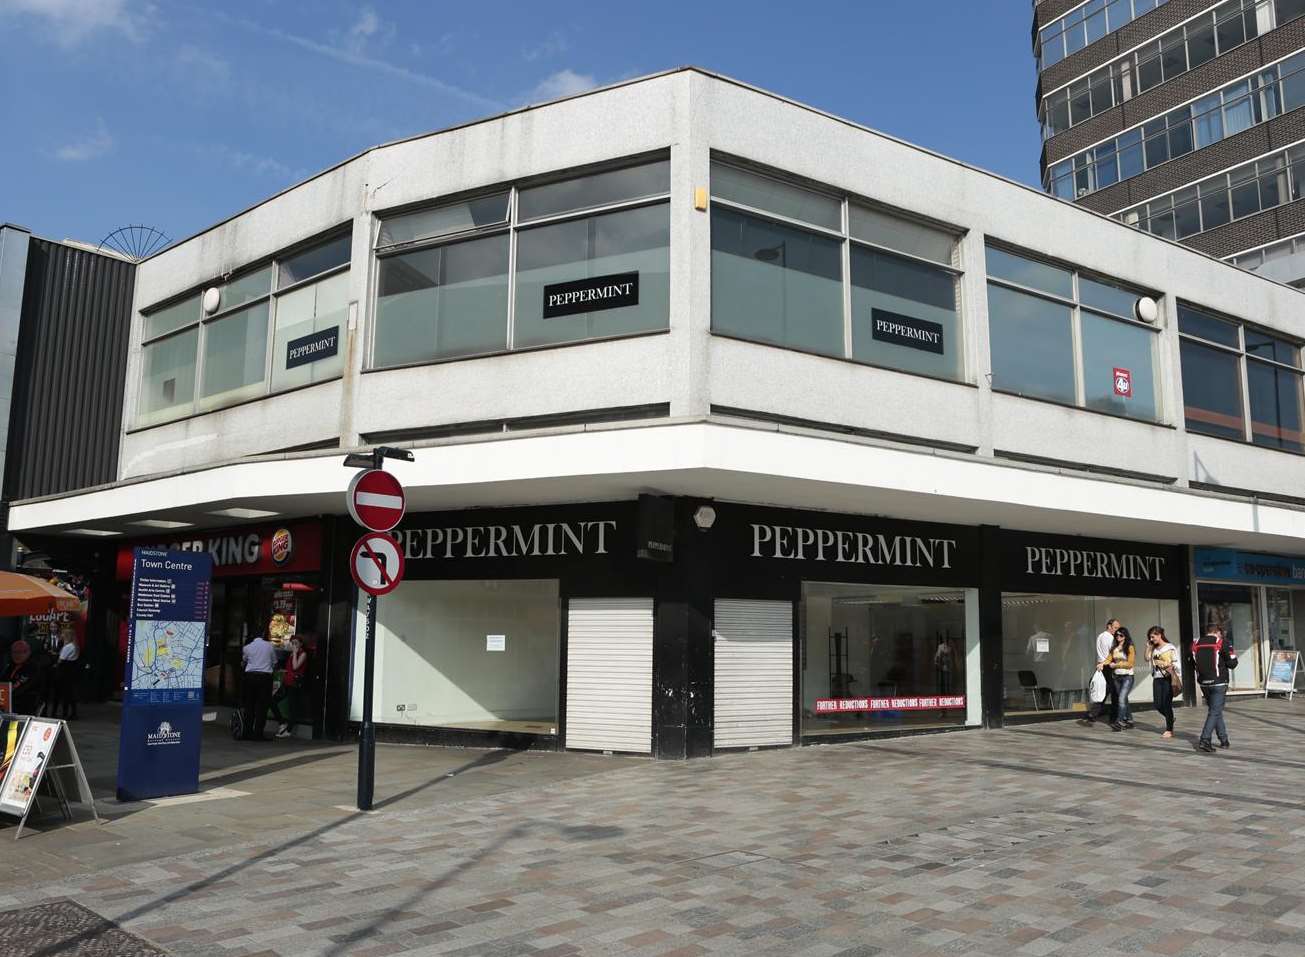 The former clothes shop Peppermint